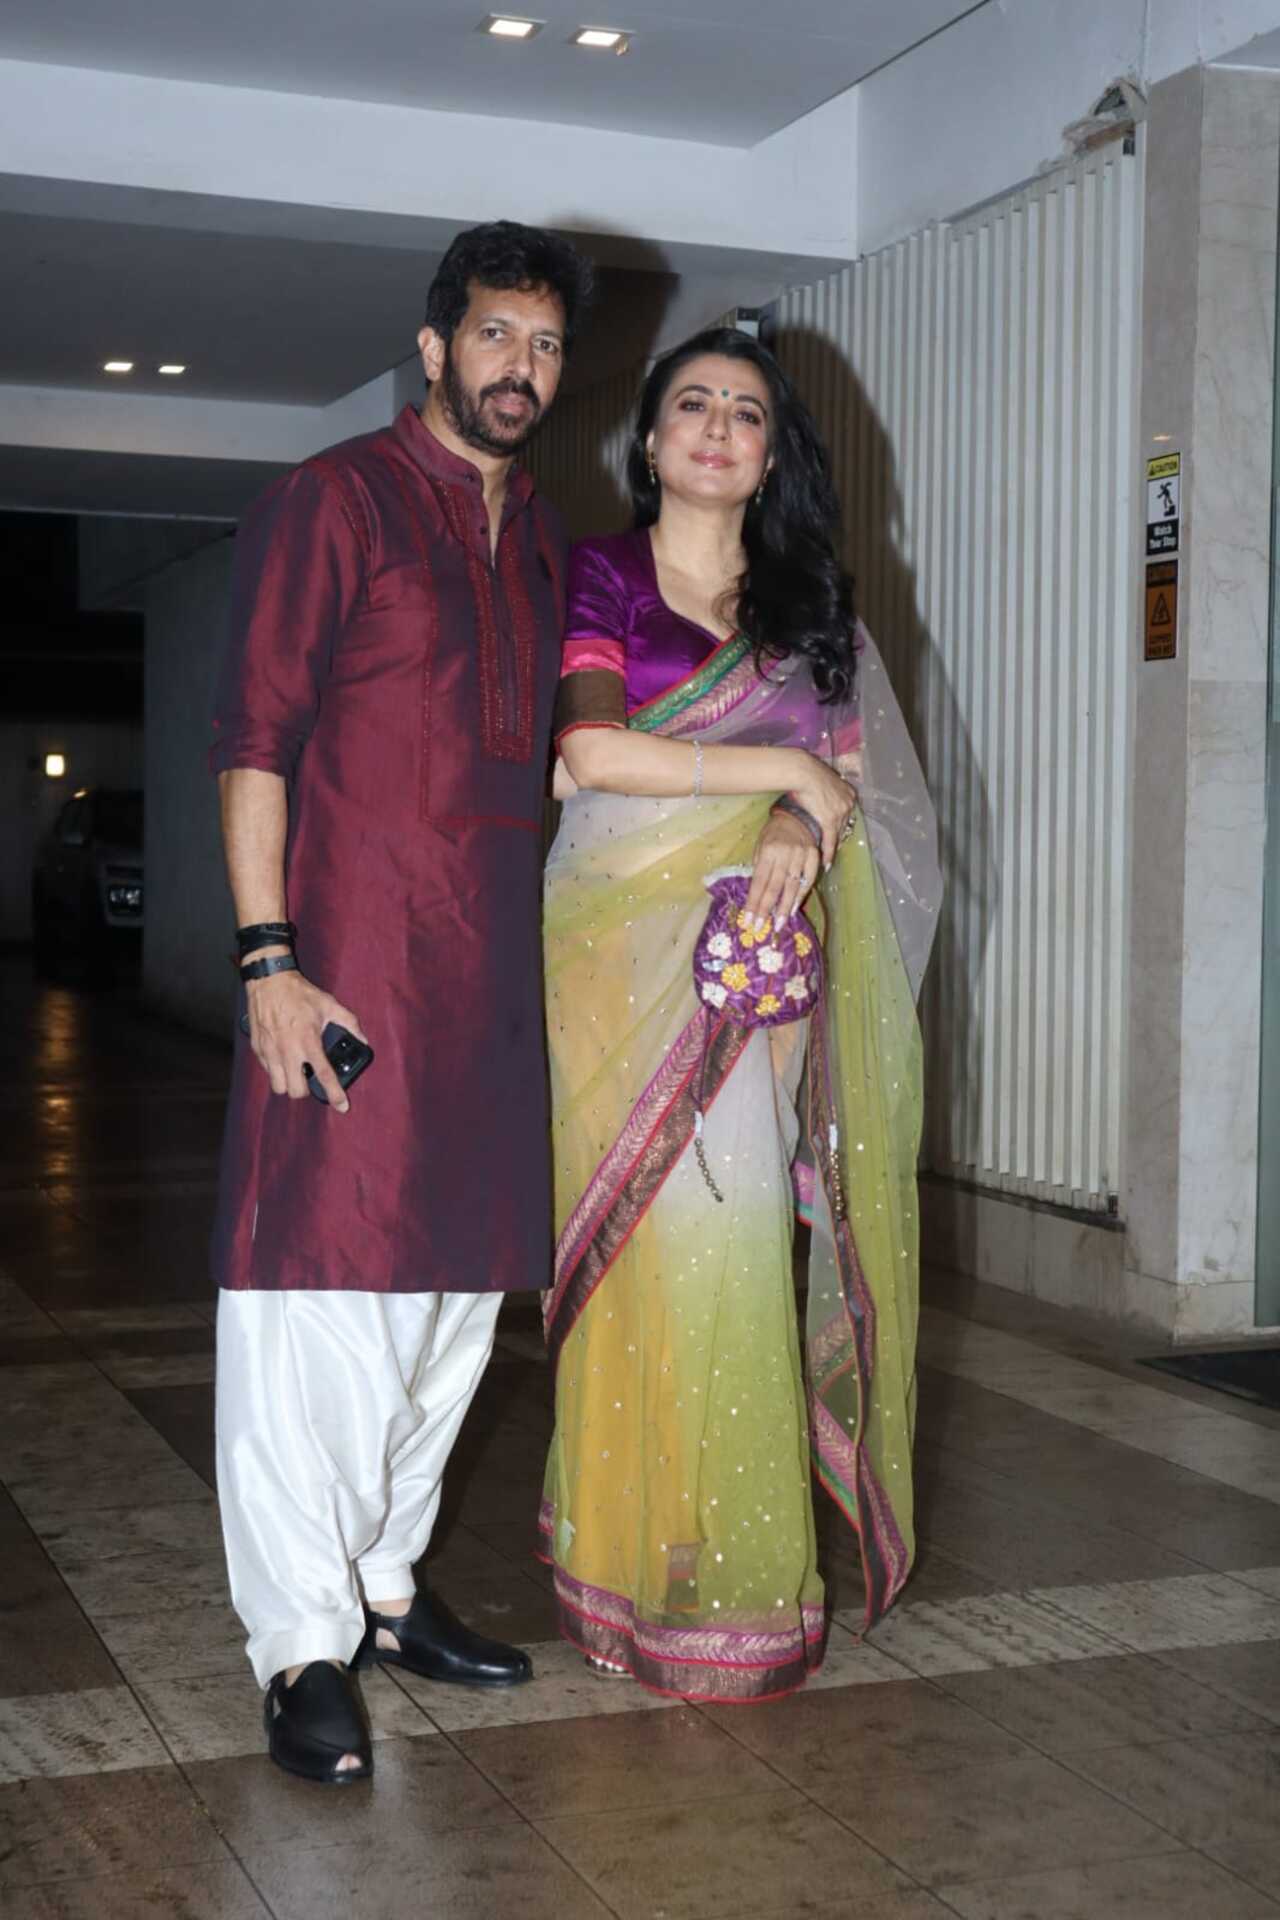 Kabir Khan and his wife Mini Mathur were present too. The couple posed for pictures